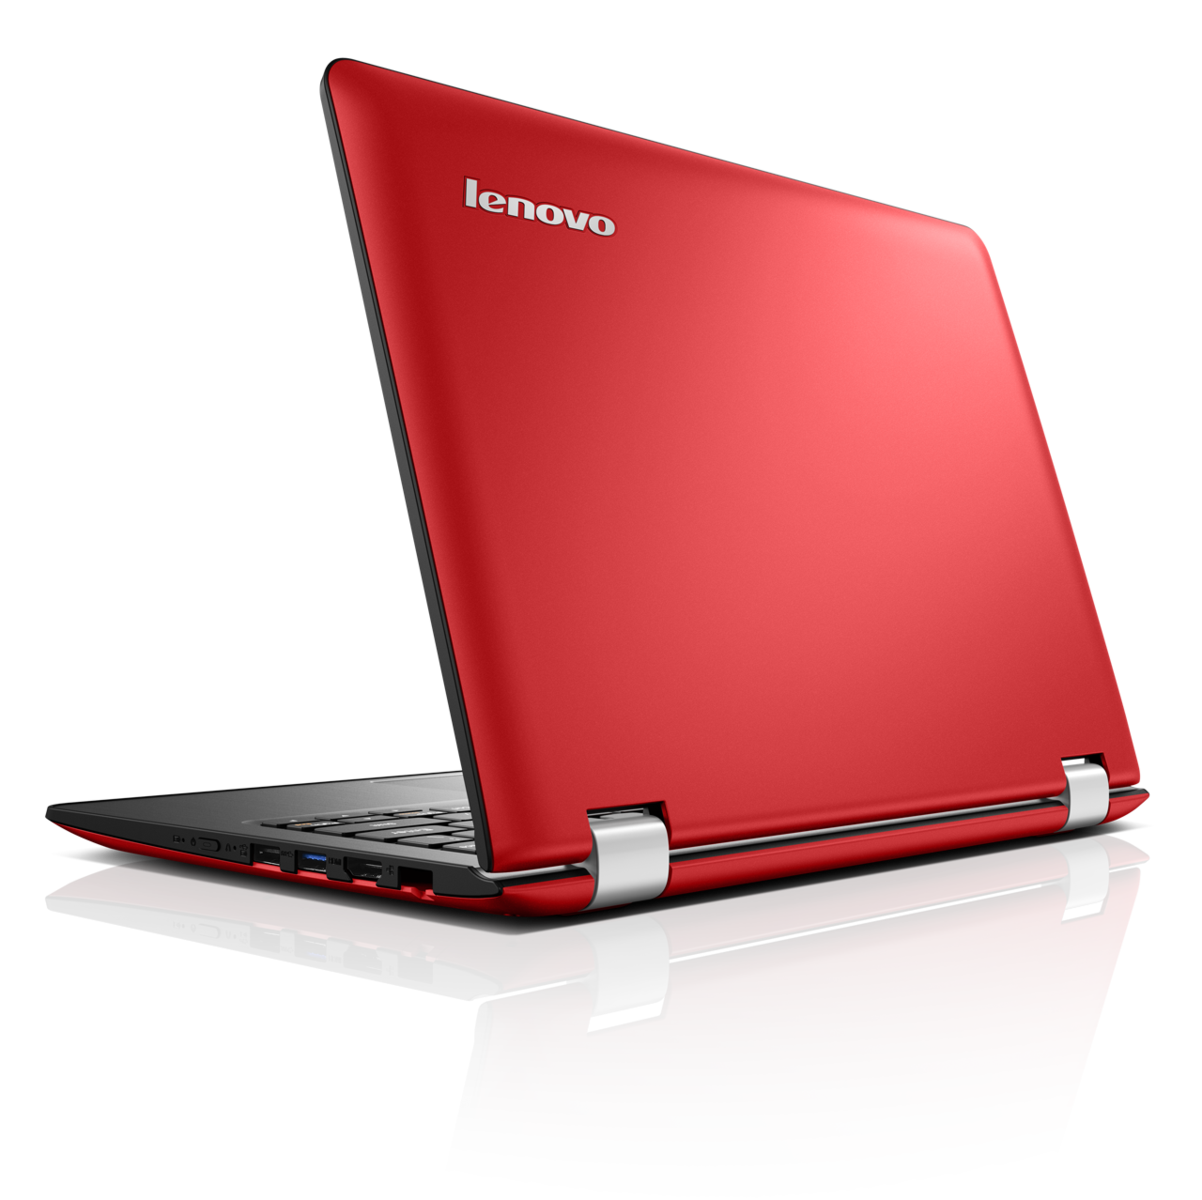 Lenovo Ideapad 300 and 300S series coming this October - NotebookCheck.net News1202 x 1200